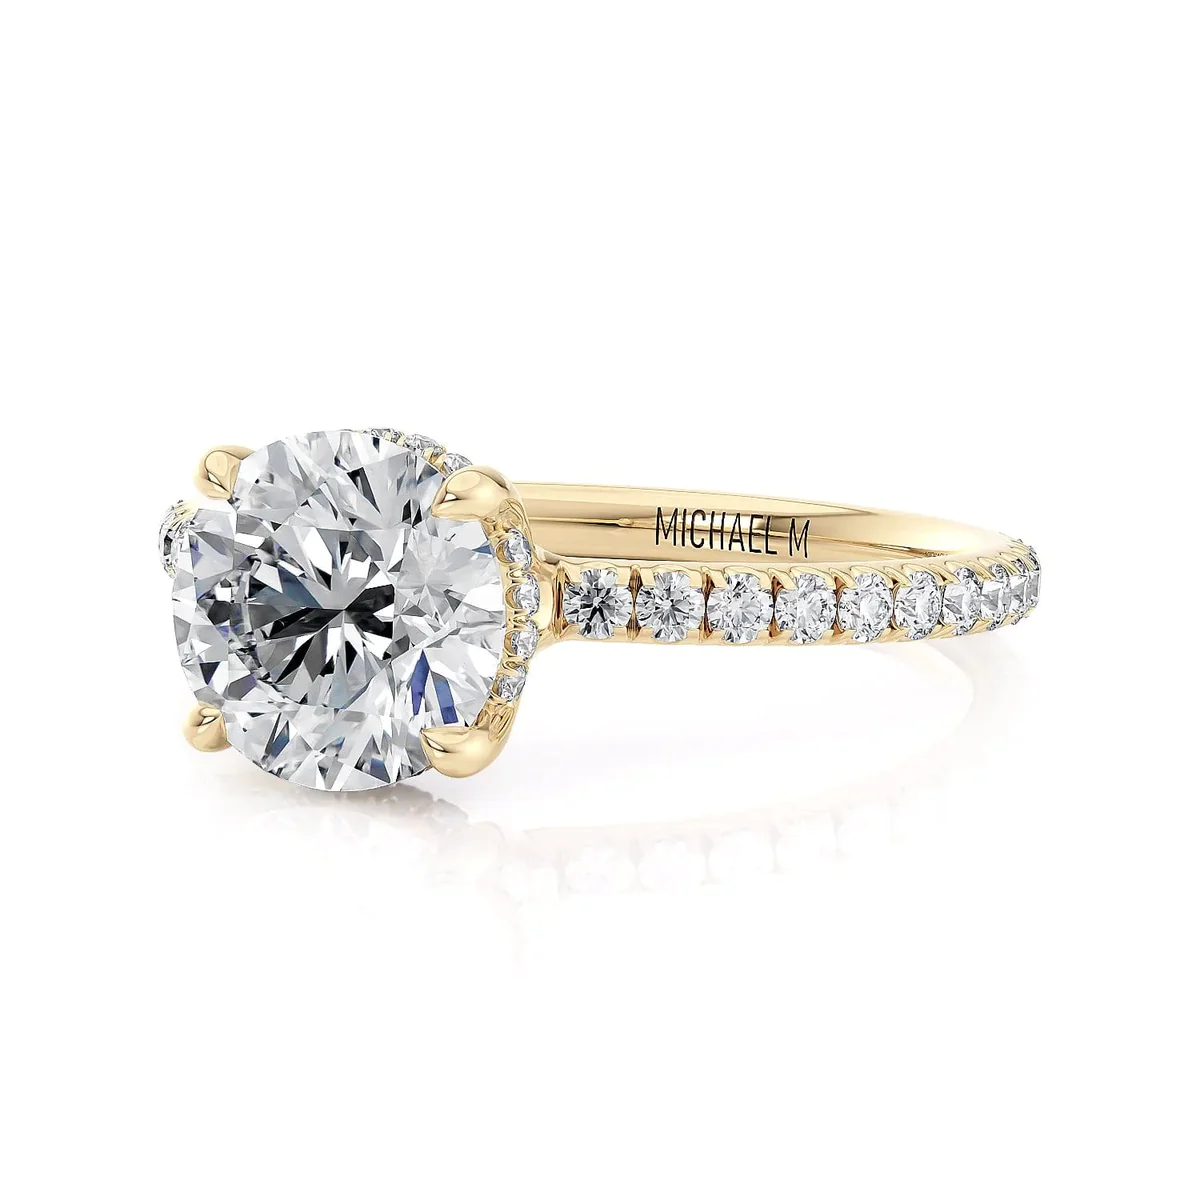 https://www.arthursjewelers.com/content/images/thumbs/Original/R788-15_yellow-204228078.png